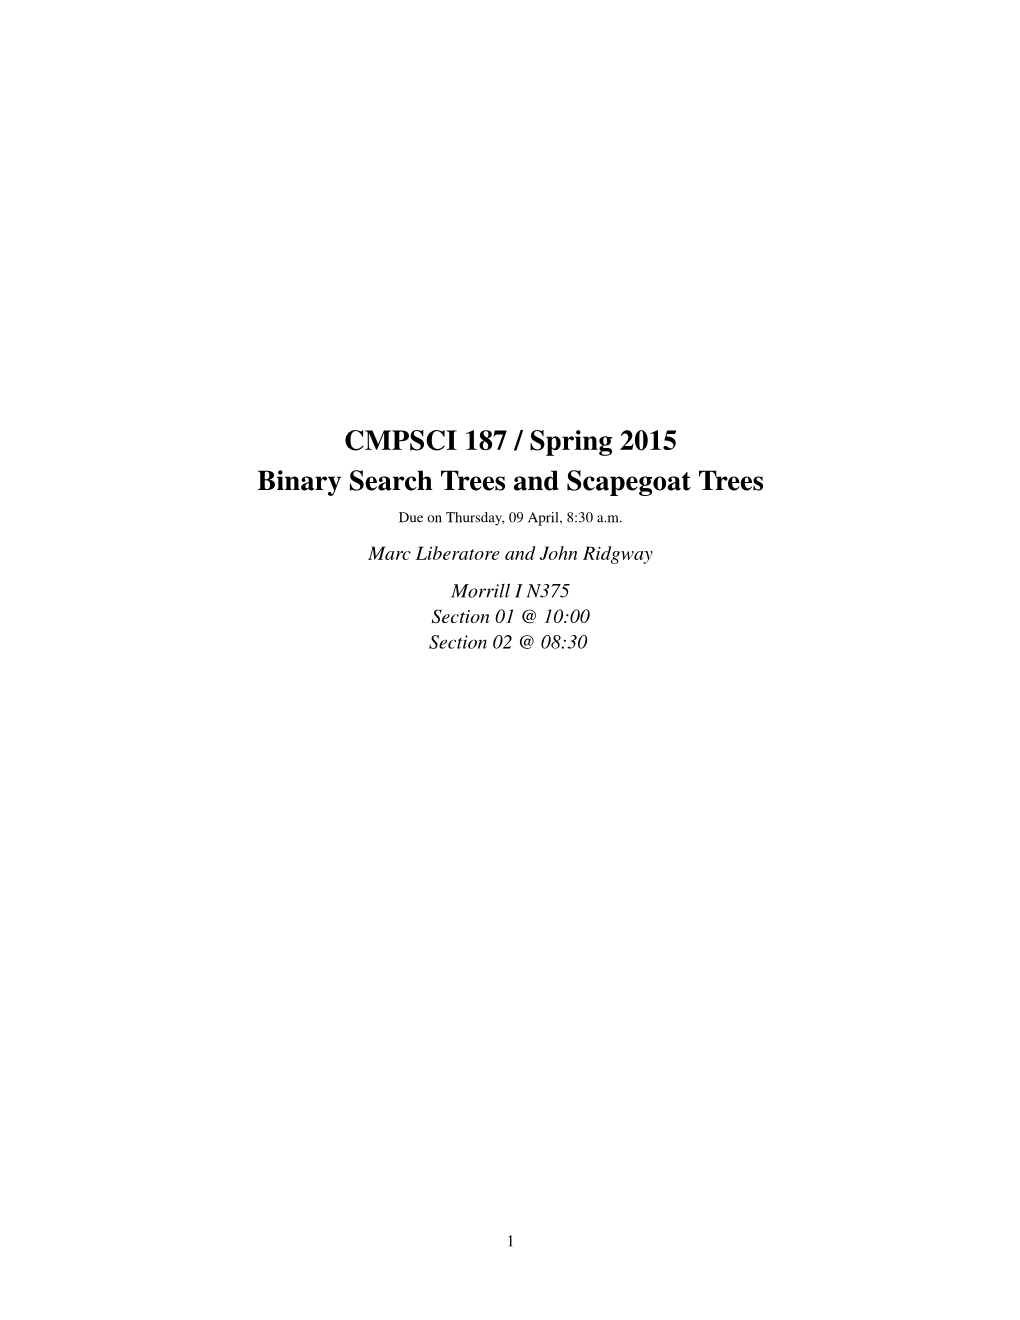 CMPSCI 187 / Spring 2015 Binary Search Trees and Scapegoat Trees Due on Thursday, 09 April, 8:30 A.M